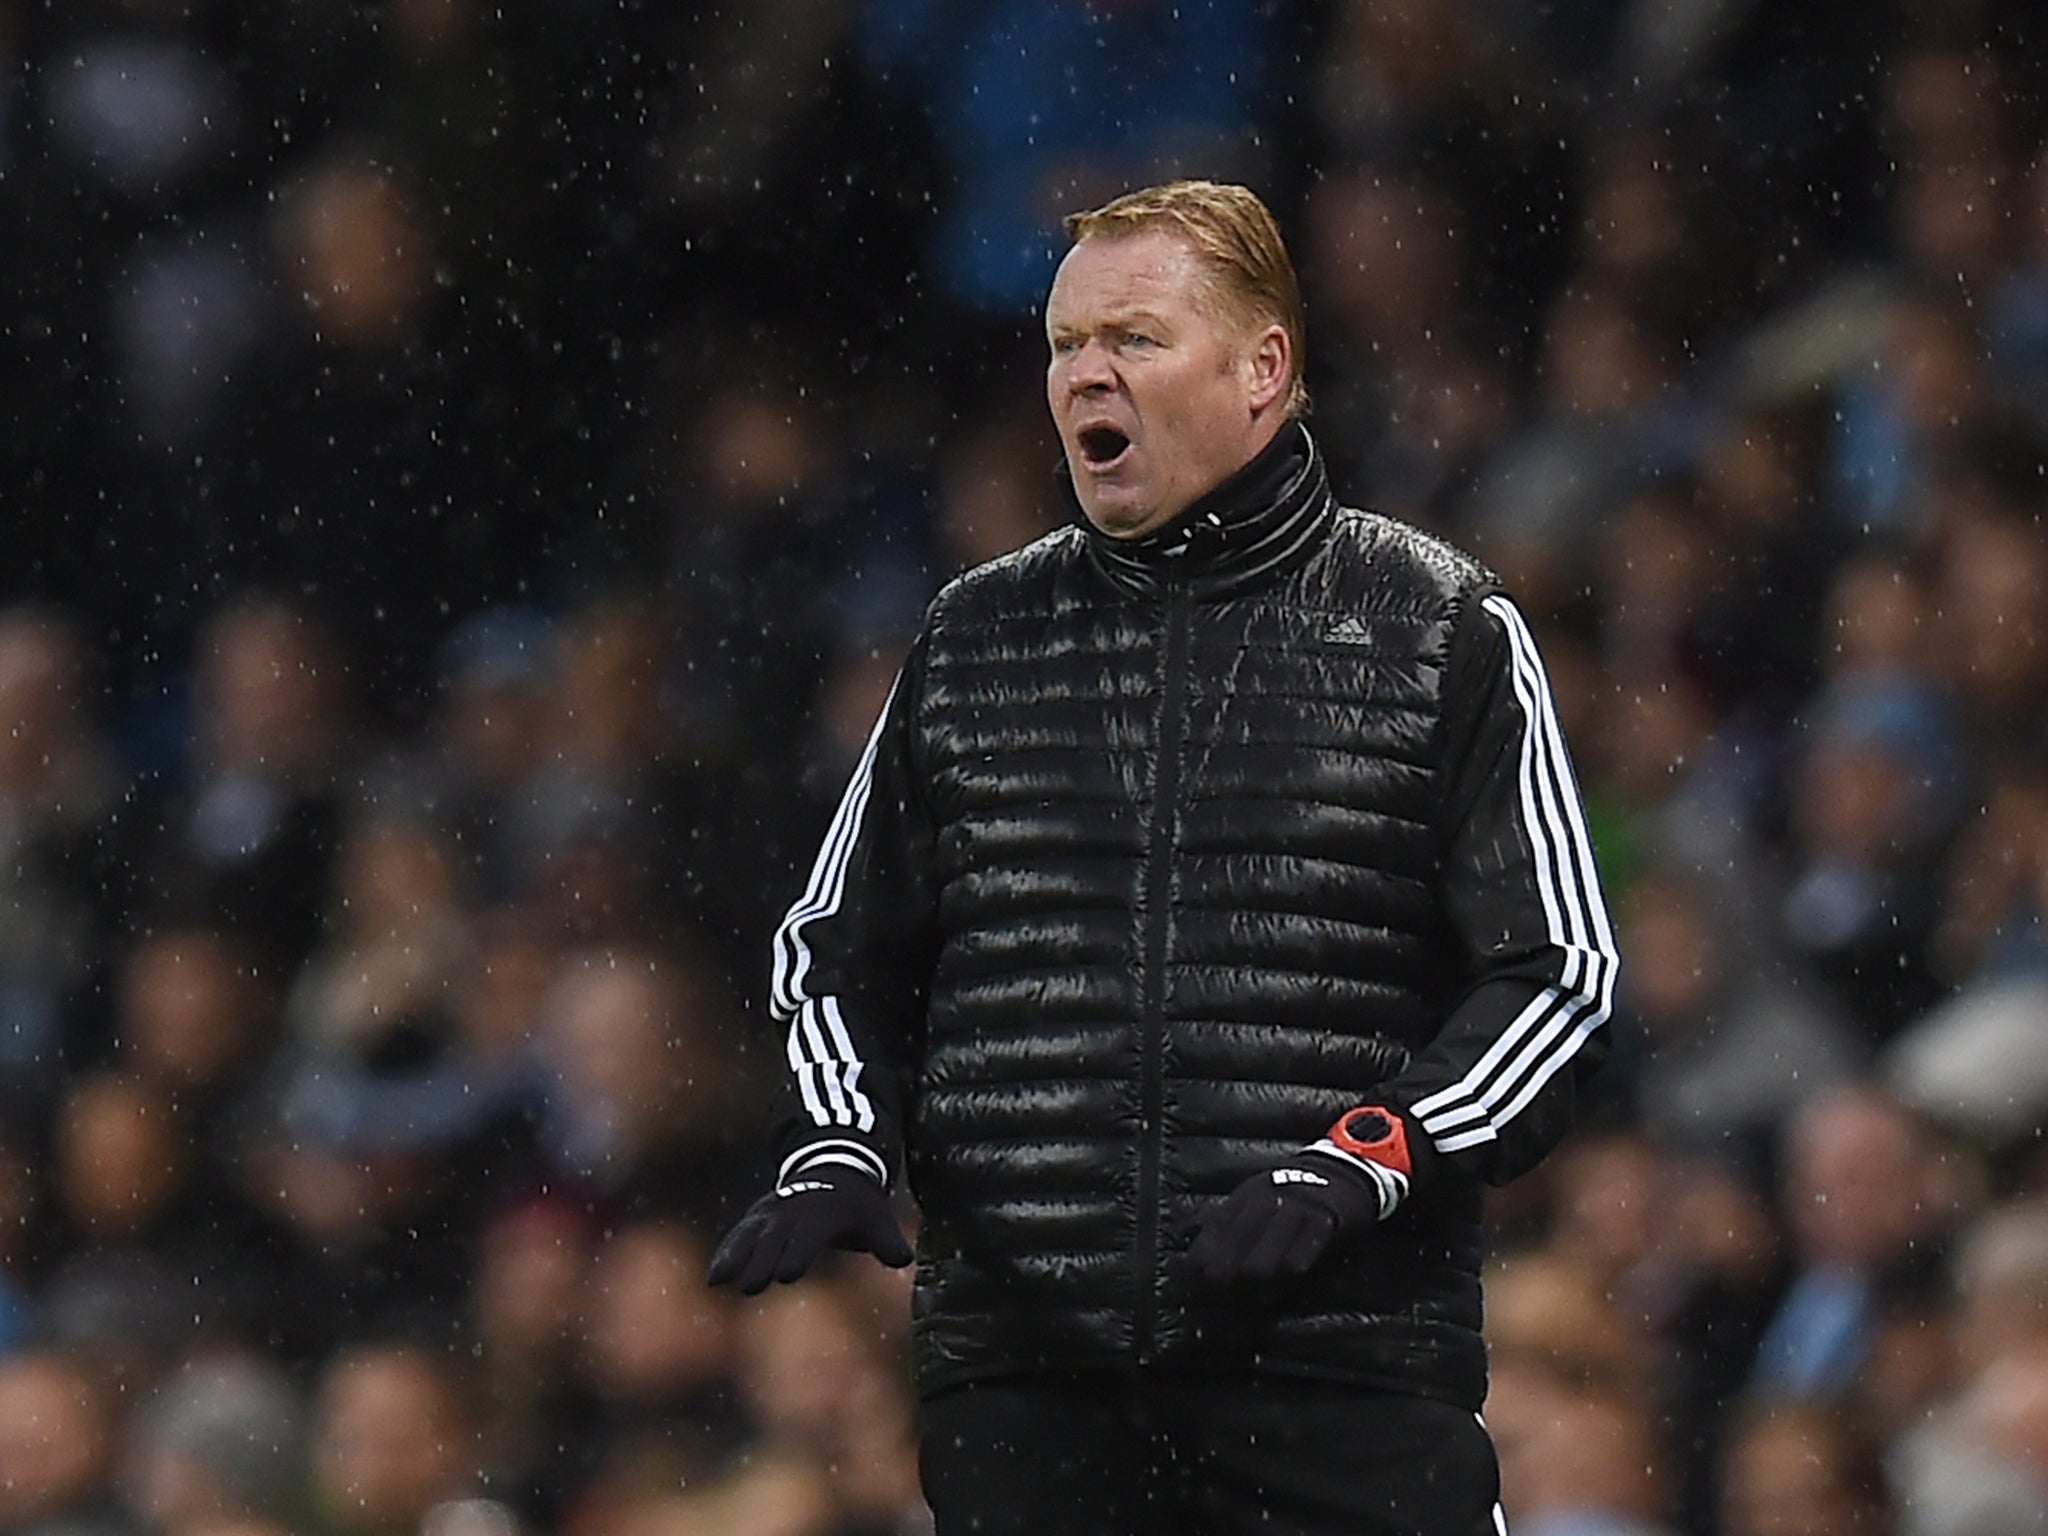 Southampton manager Ronald Koeman reacts on the touchline